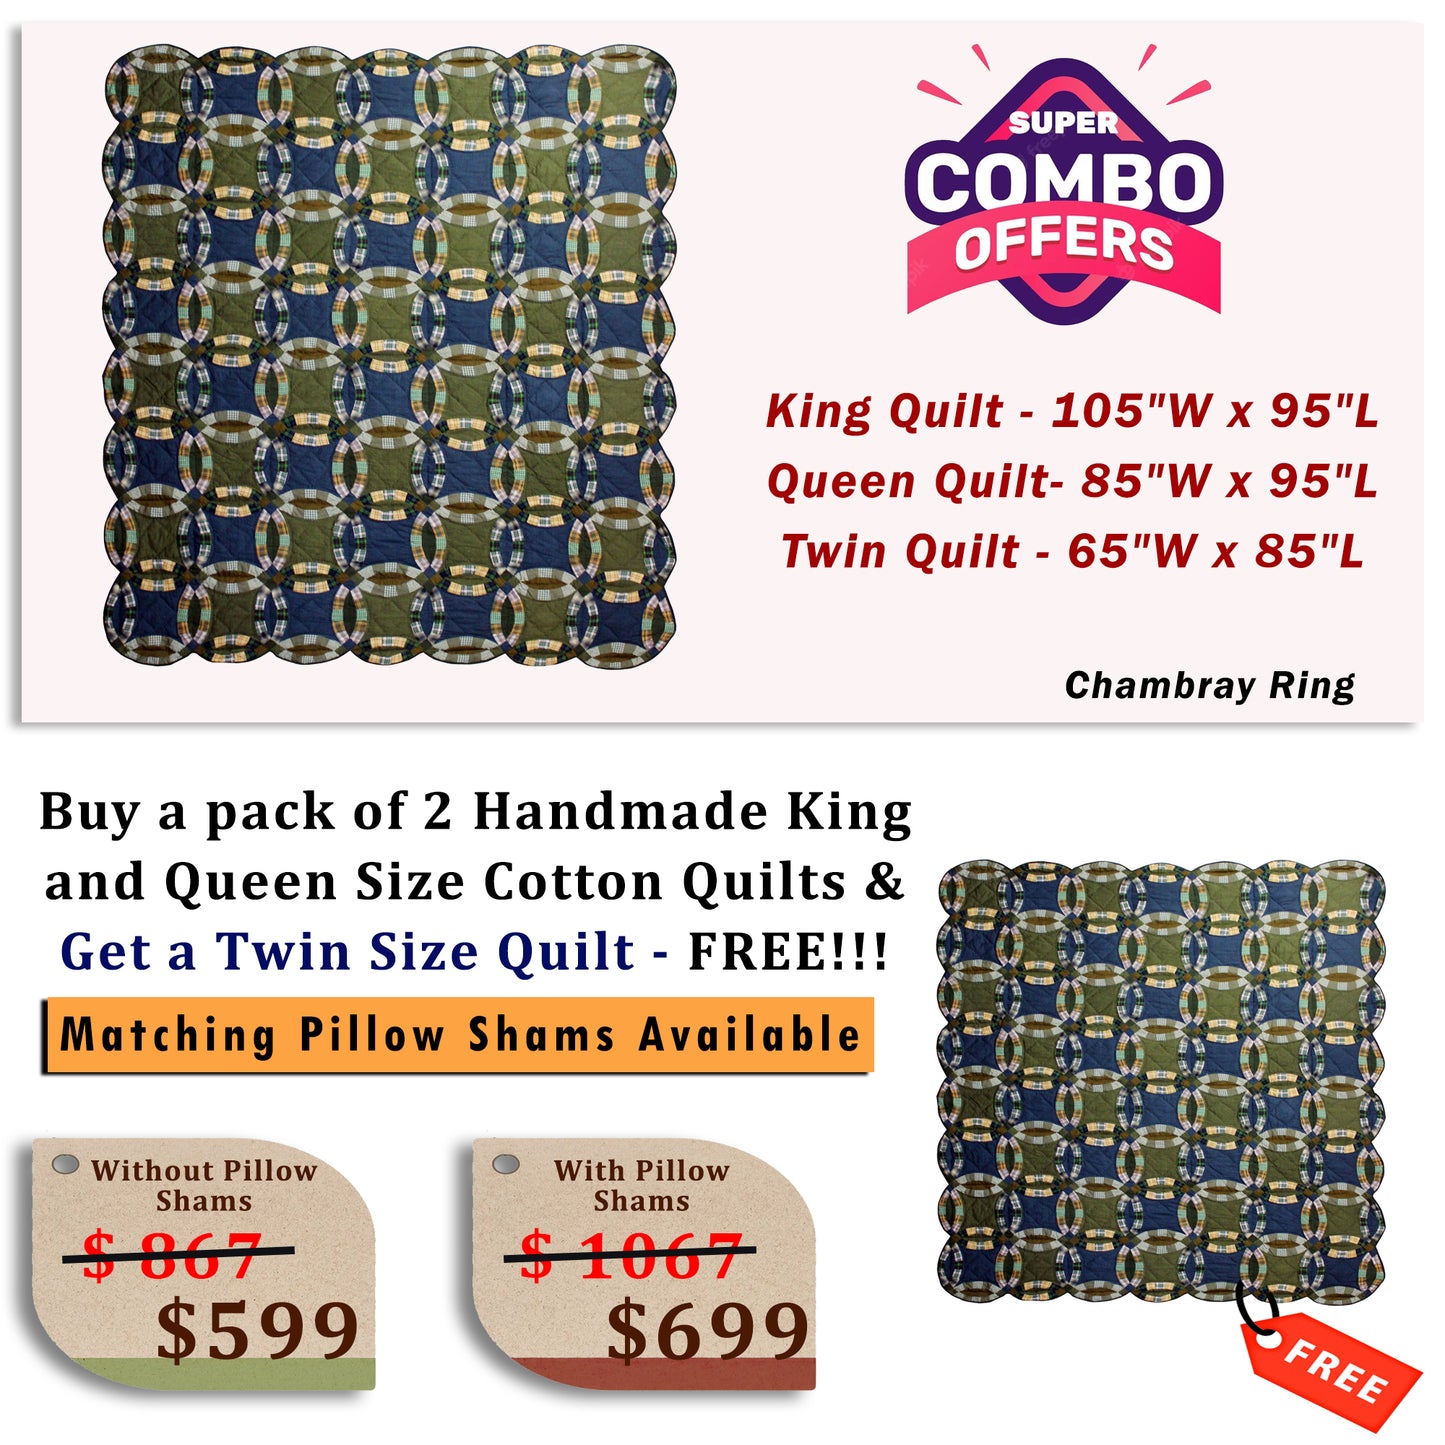 Chambray Whirl - Buy a pack of King and Queen Size Quilt, and get a Twin Size Quilt FREE!!!